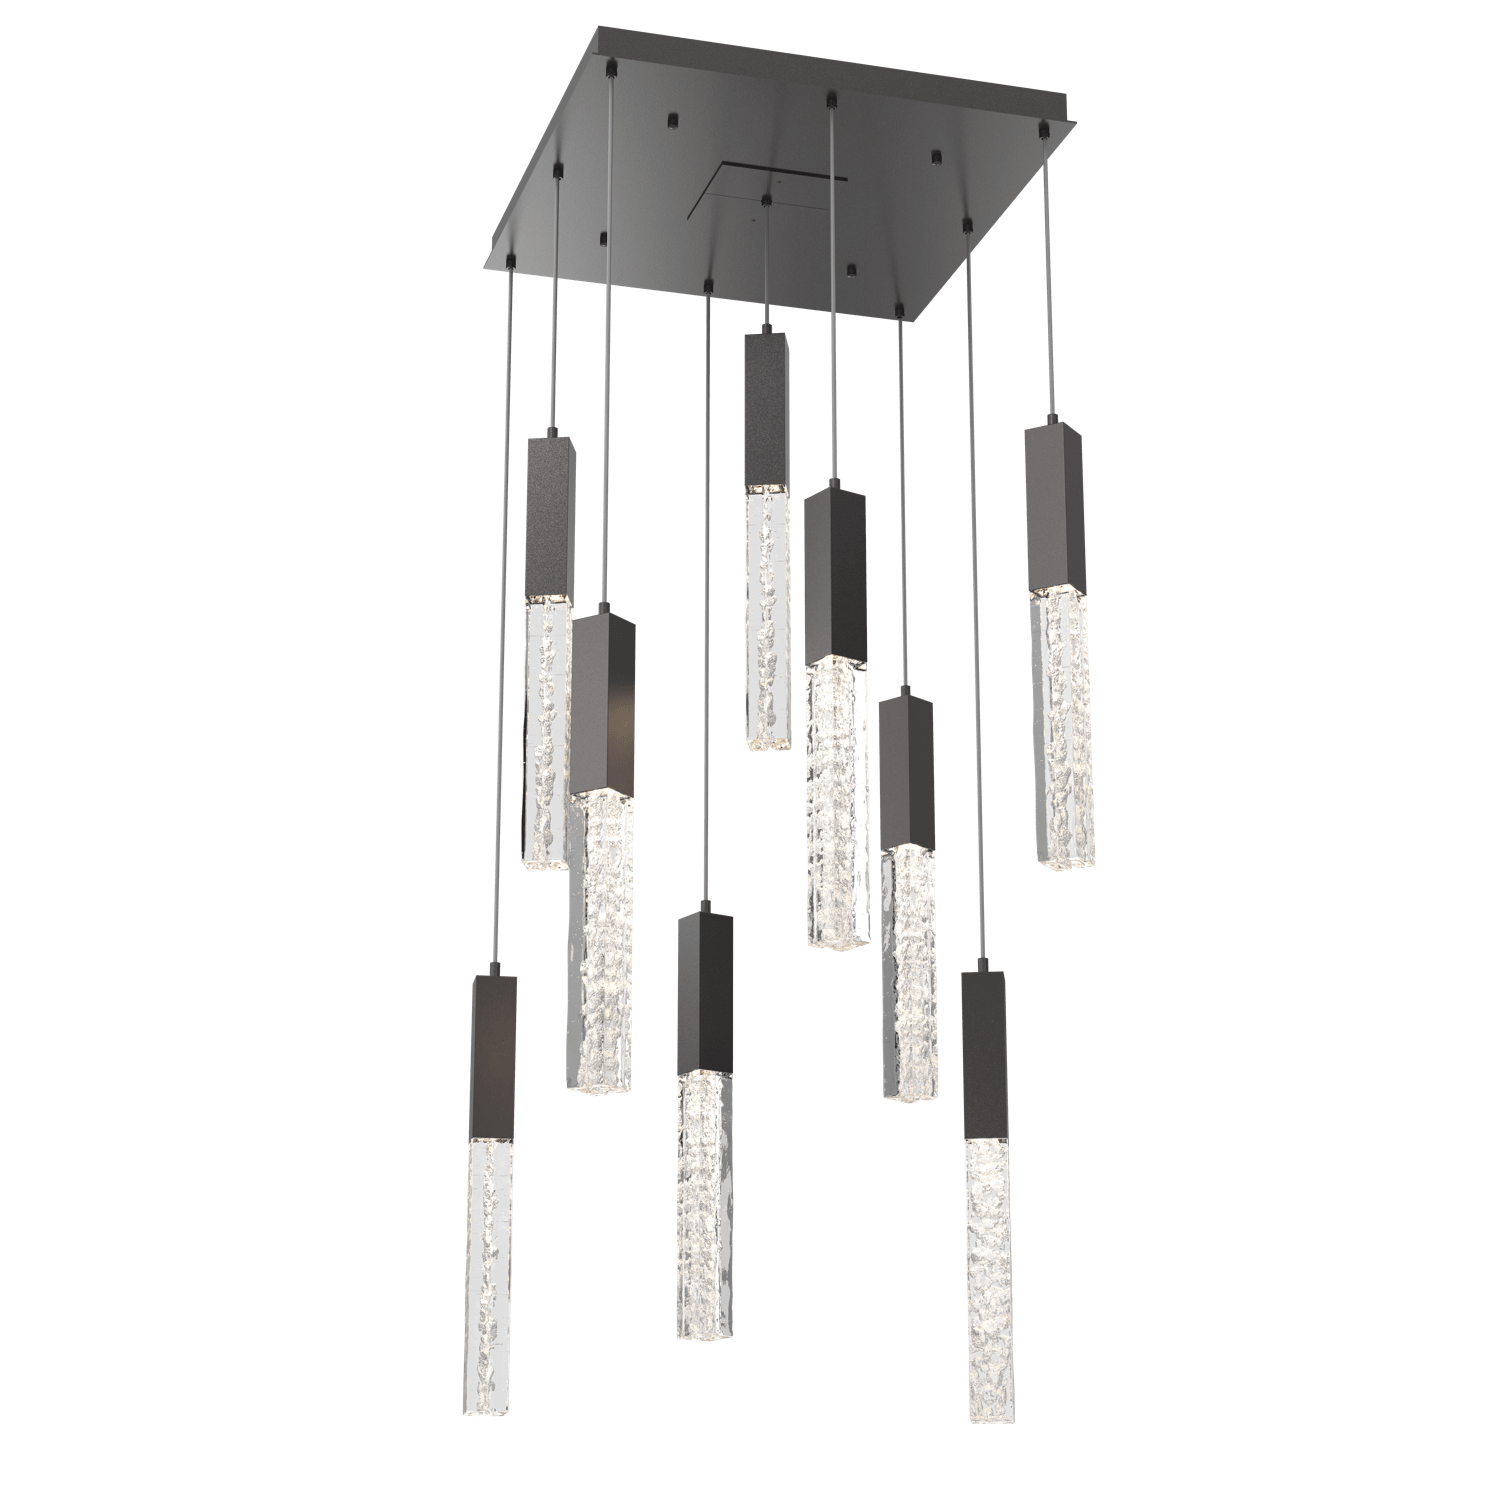 CHB0060-09-GP-GC-Hammerton-Studio-Axis-9-Light-Pendant-Chandelier-with-Graphite-finish-and-clear-cast-glass-and-LED-lamping